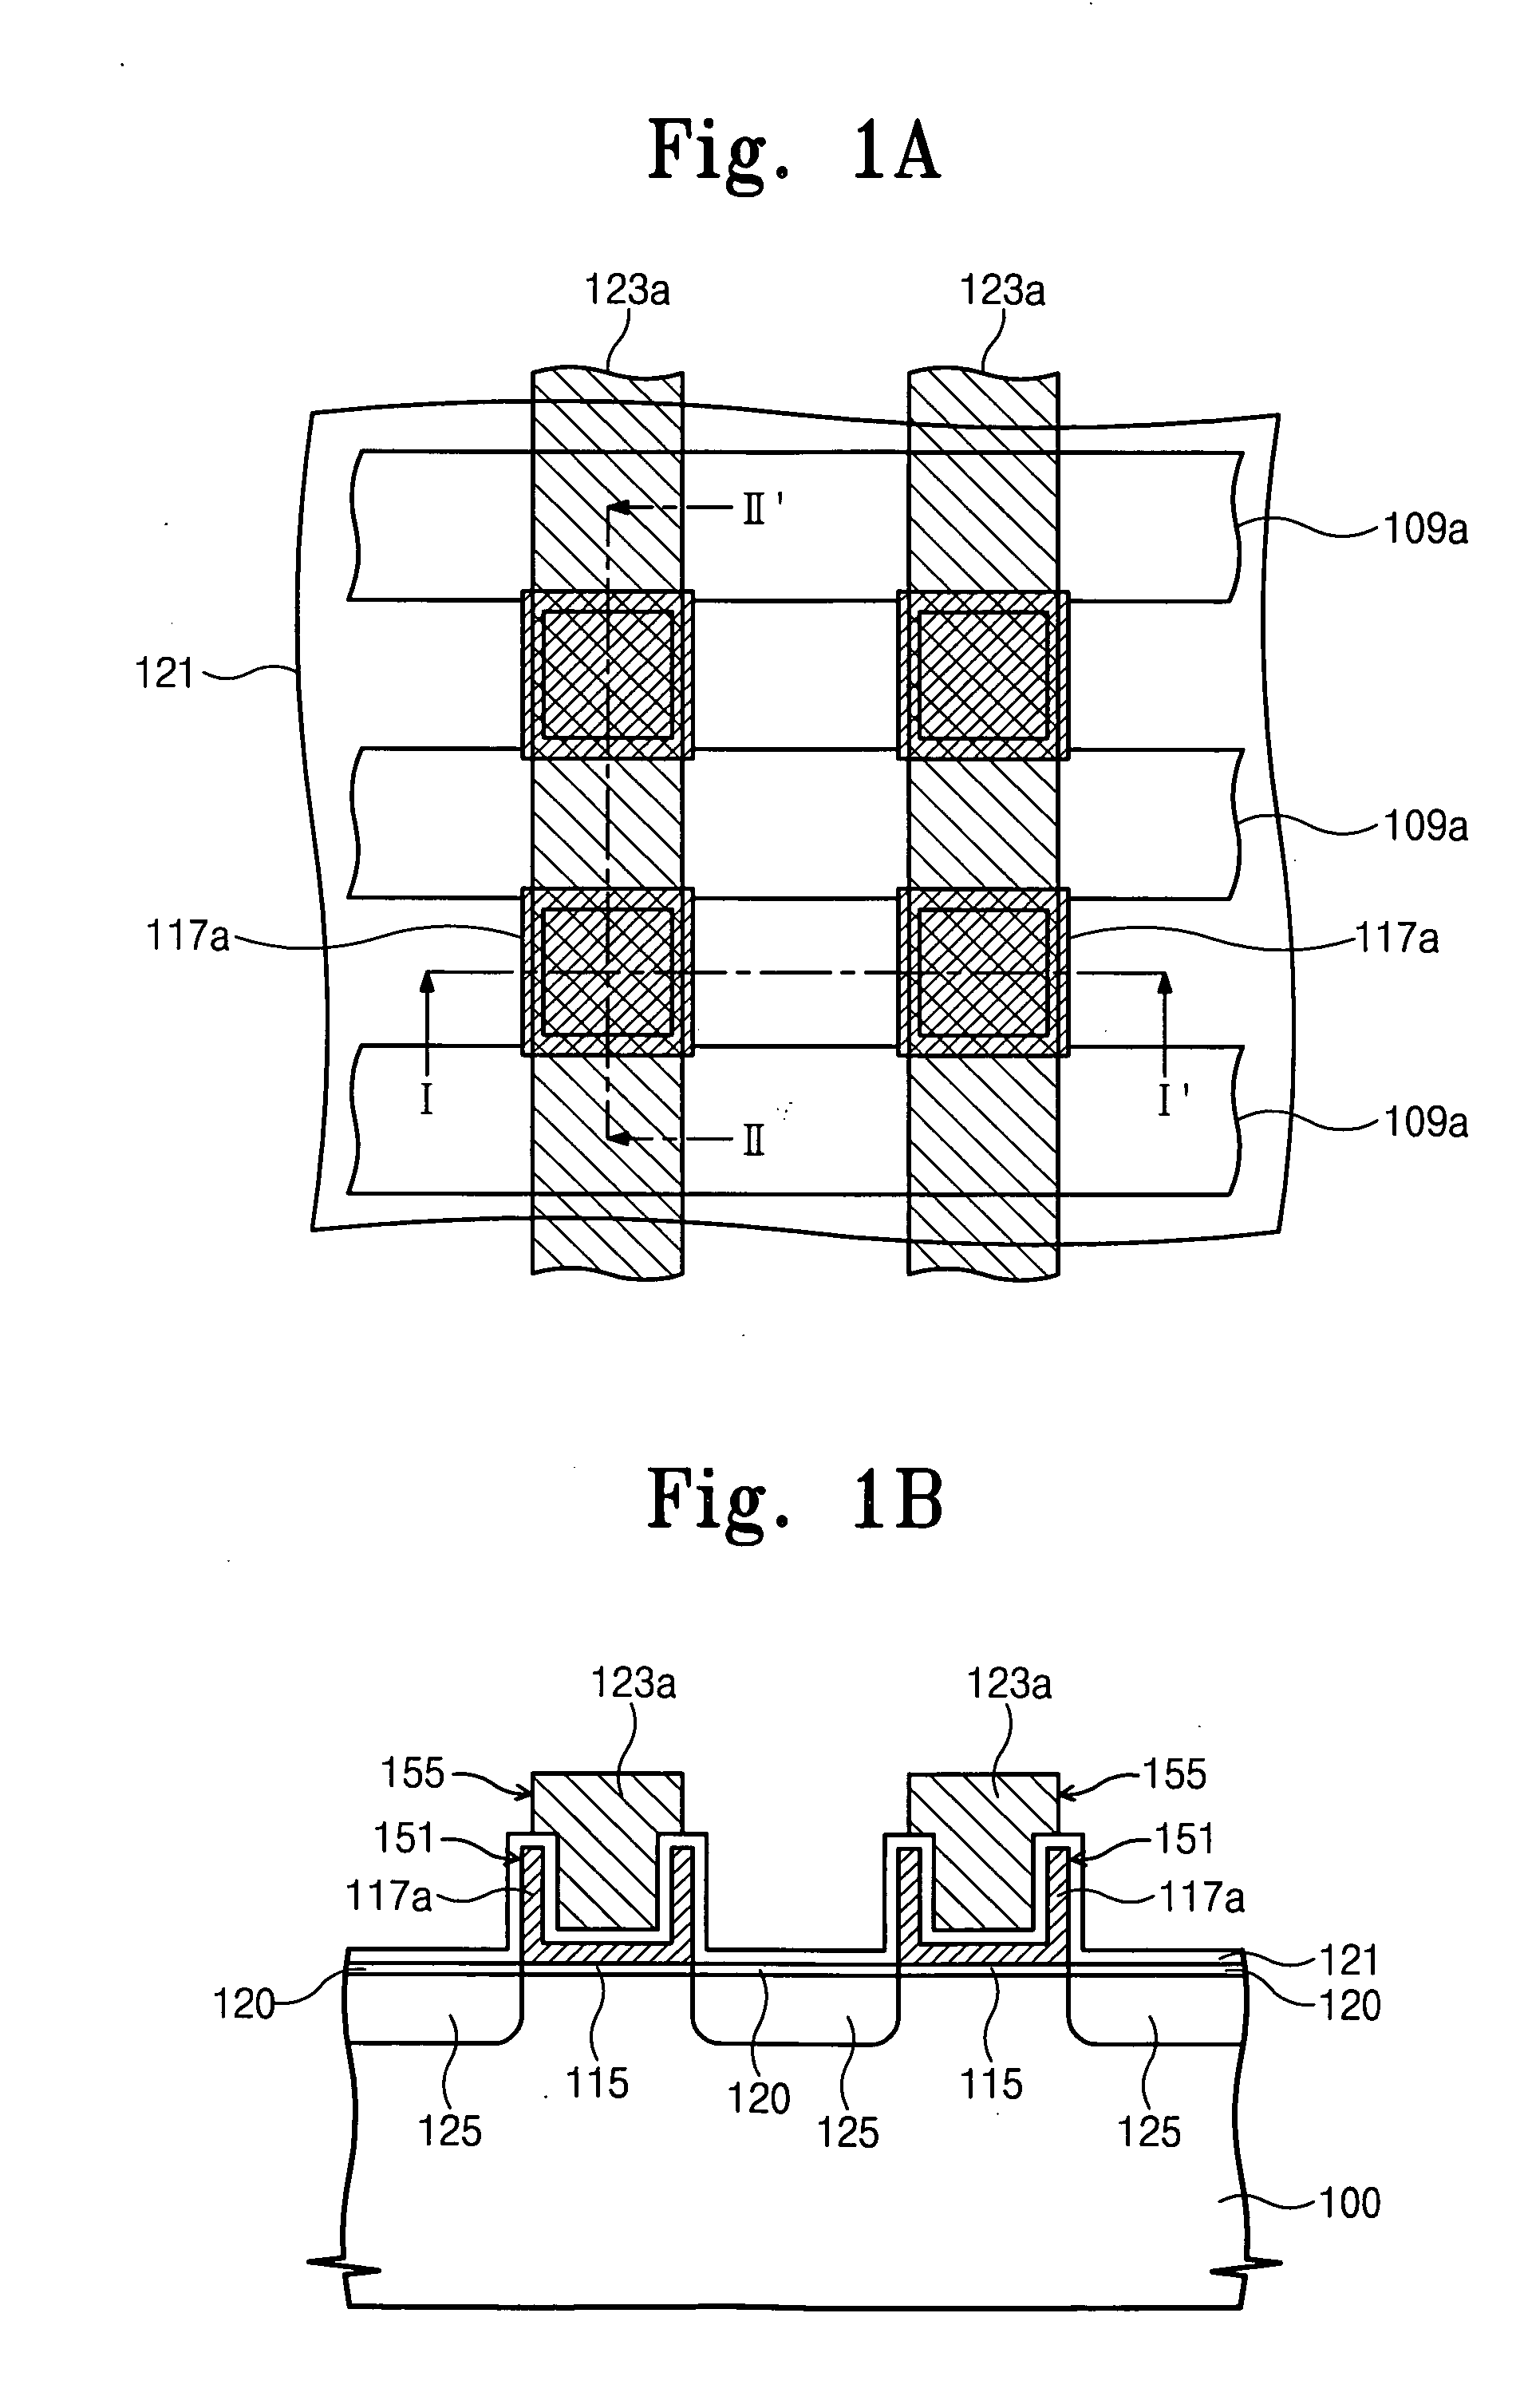 Non-volatile memory device having floating gate and methods forming the same